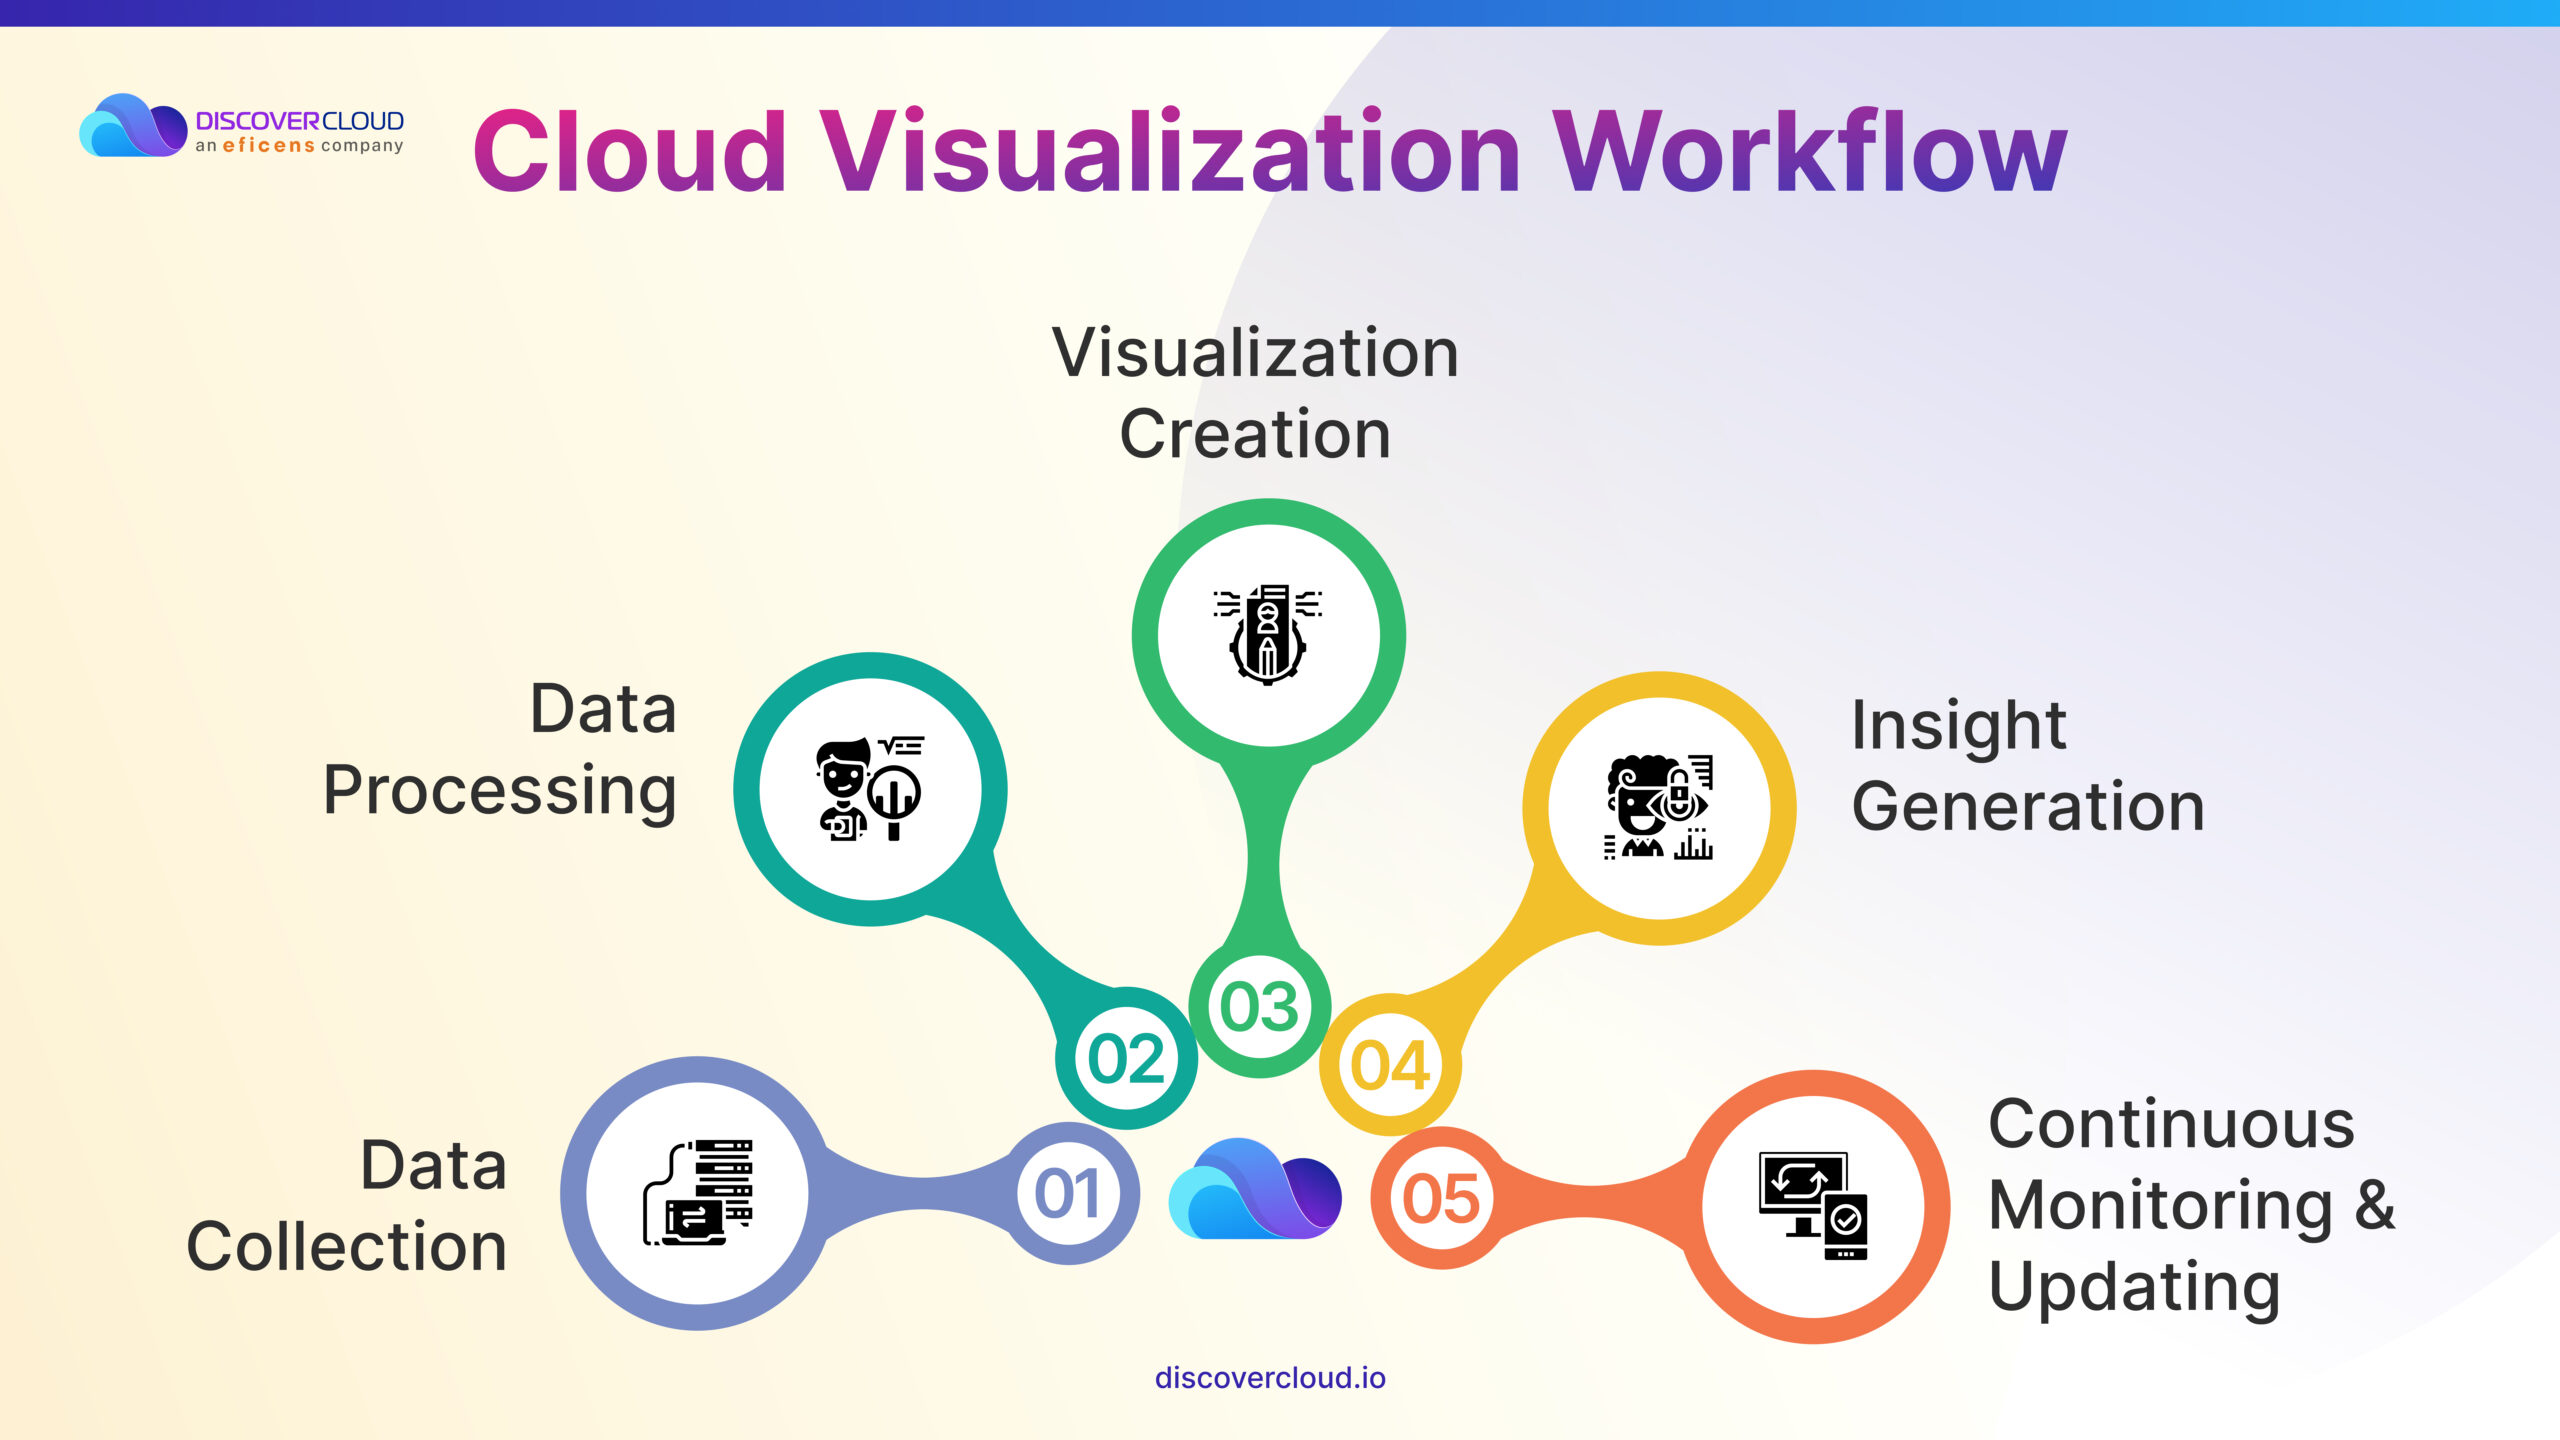 How Does Cloud Visualization Work